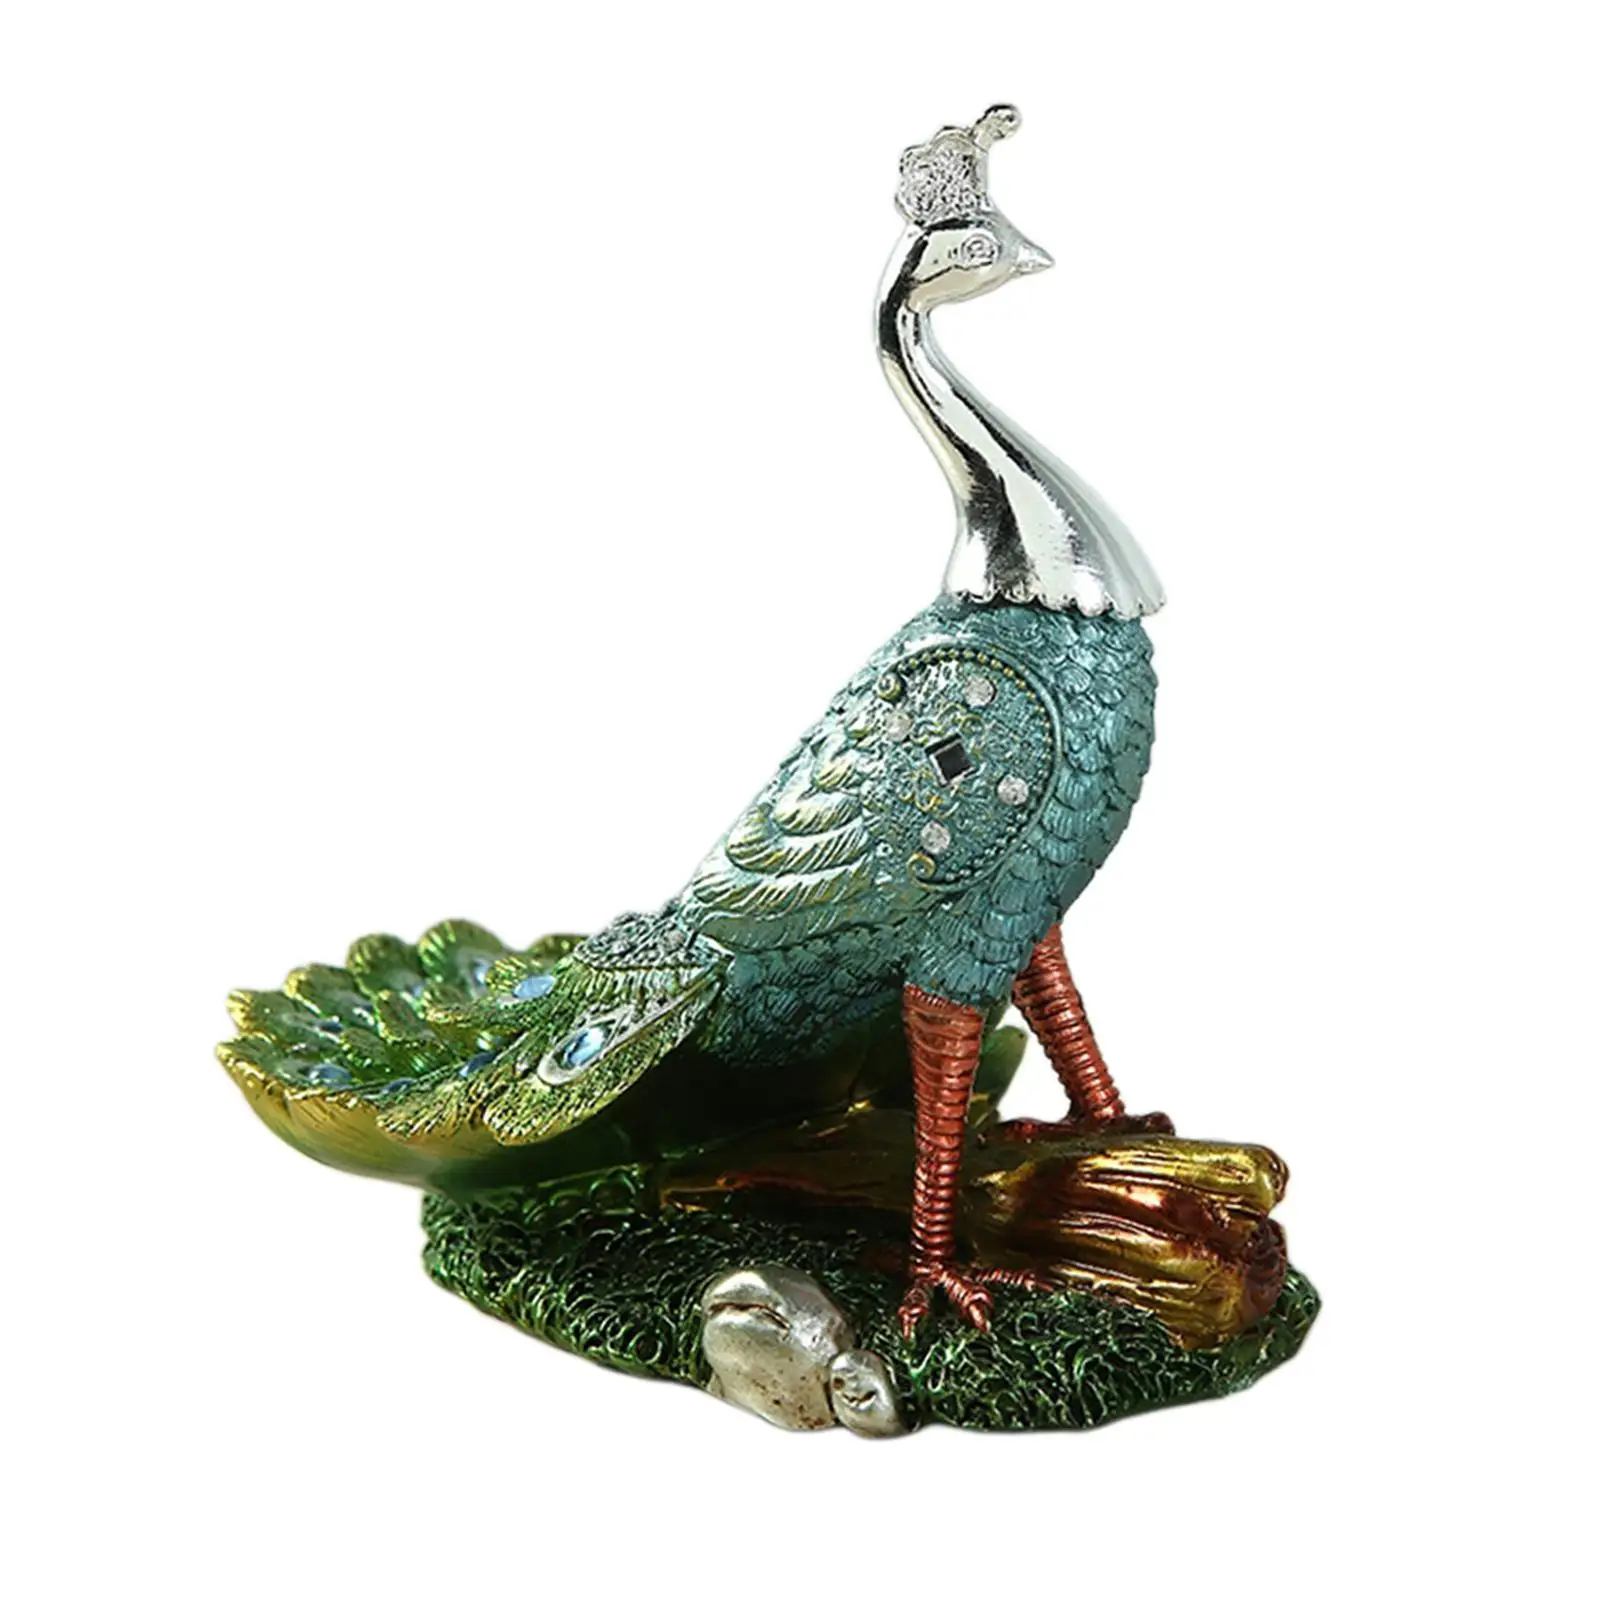 Peacock Ornament Resin Gift Statuette Crafts Sculpture Animal Model for Tabletop Home Decoration Bedside Table Bedroom Christmas